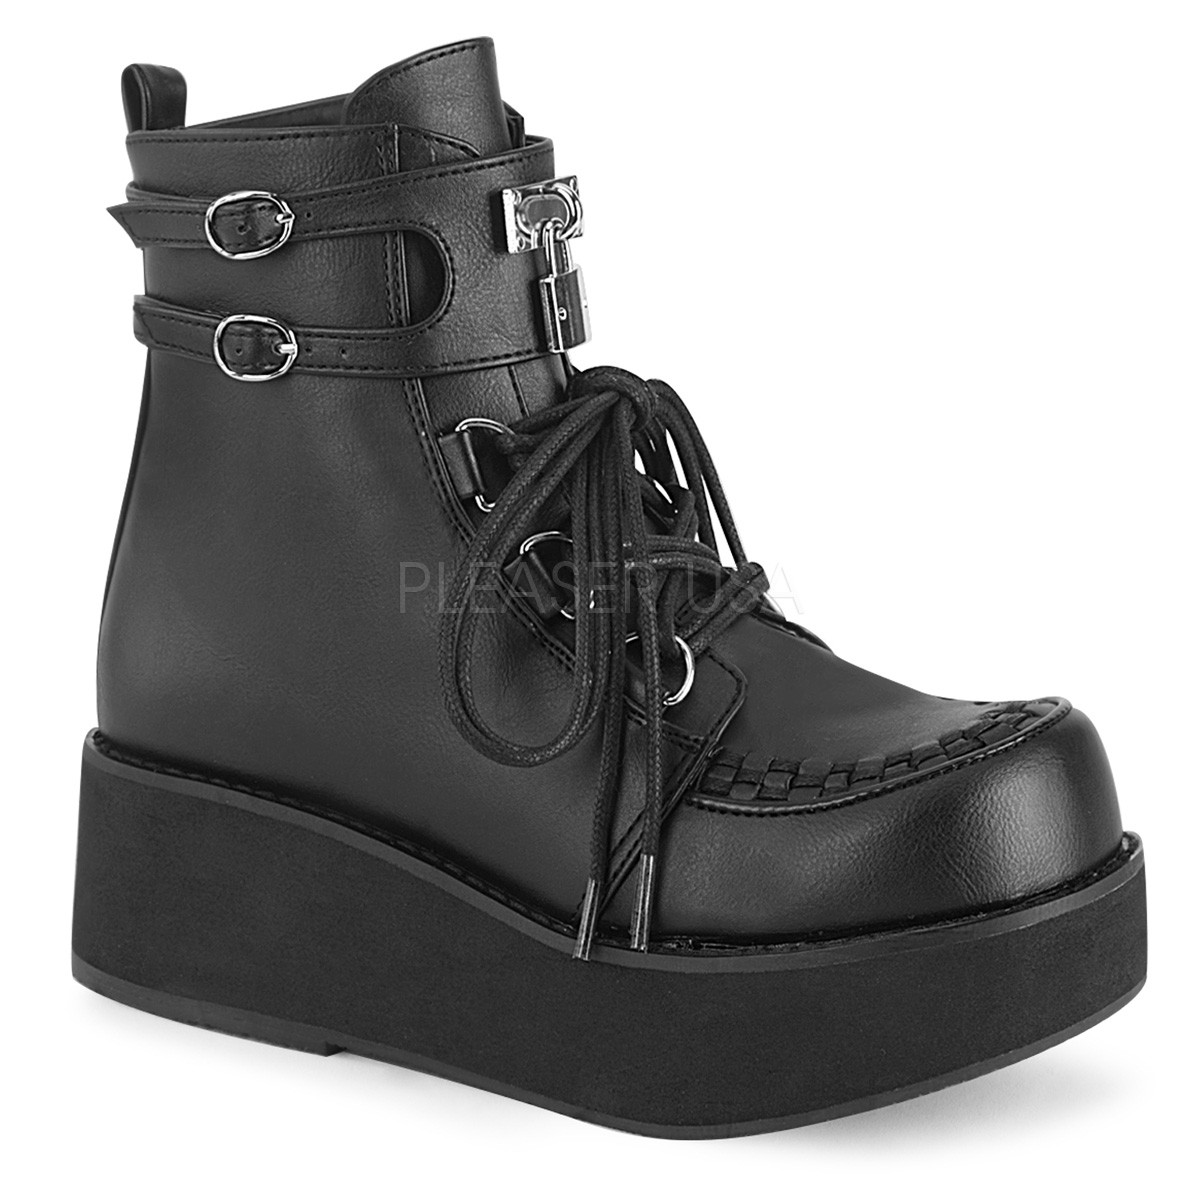 black leatherette ankle boot